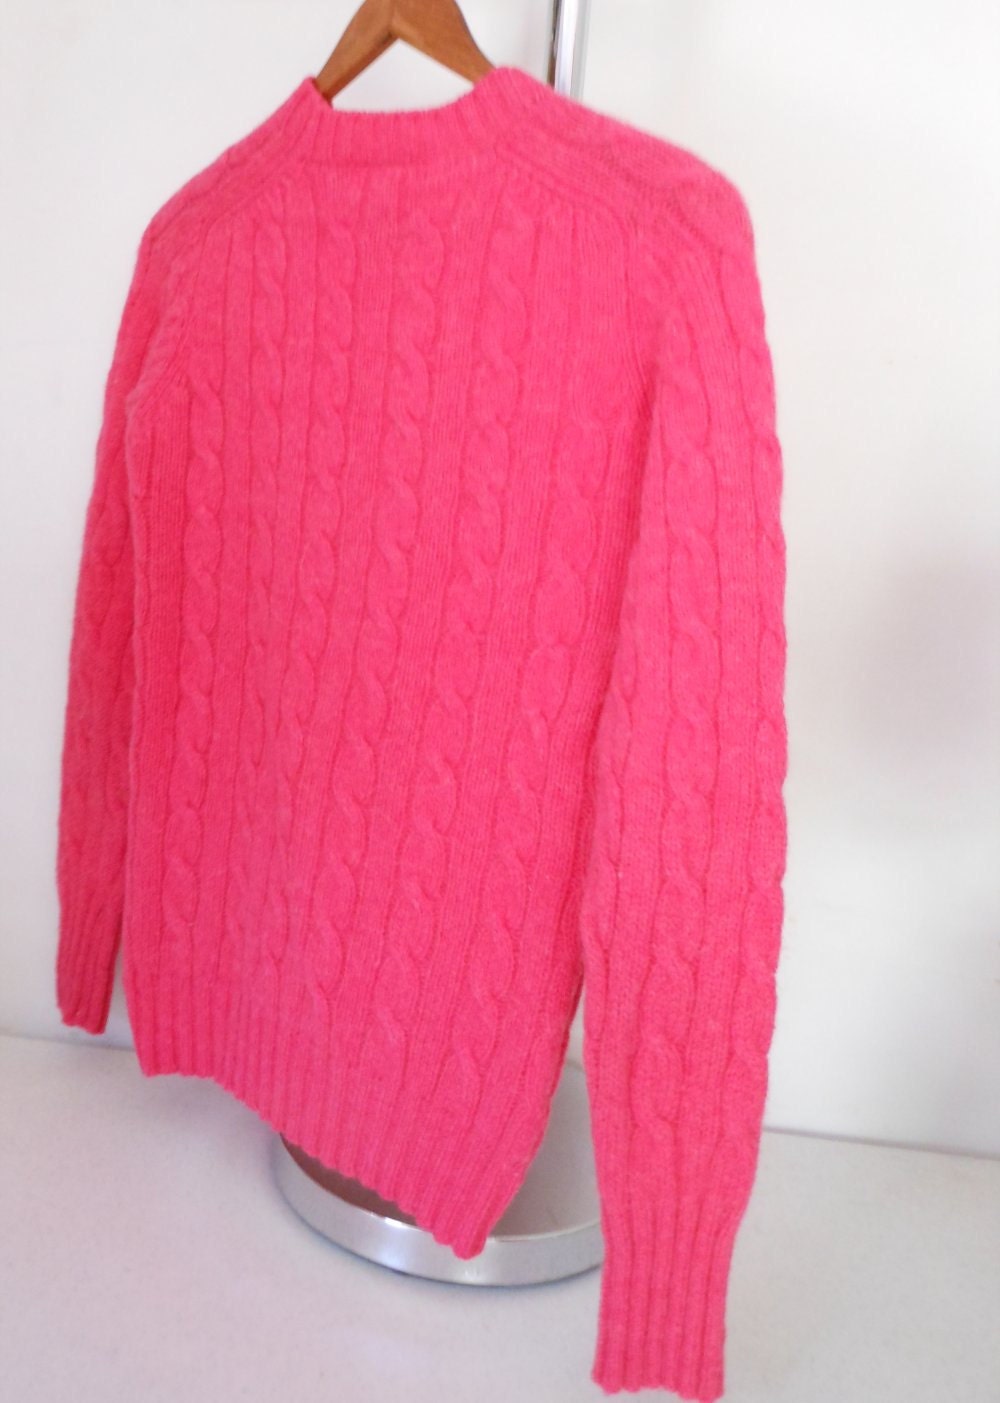 SUMMER SALE Hot Pink Sweater Pullover Cableknit Shetland Wool